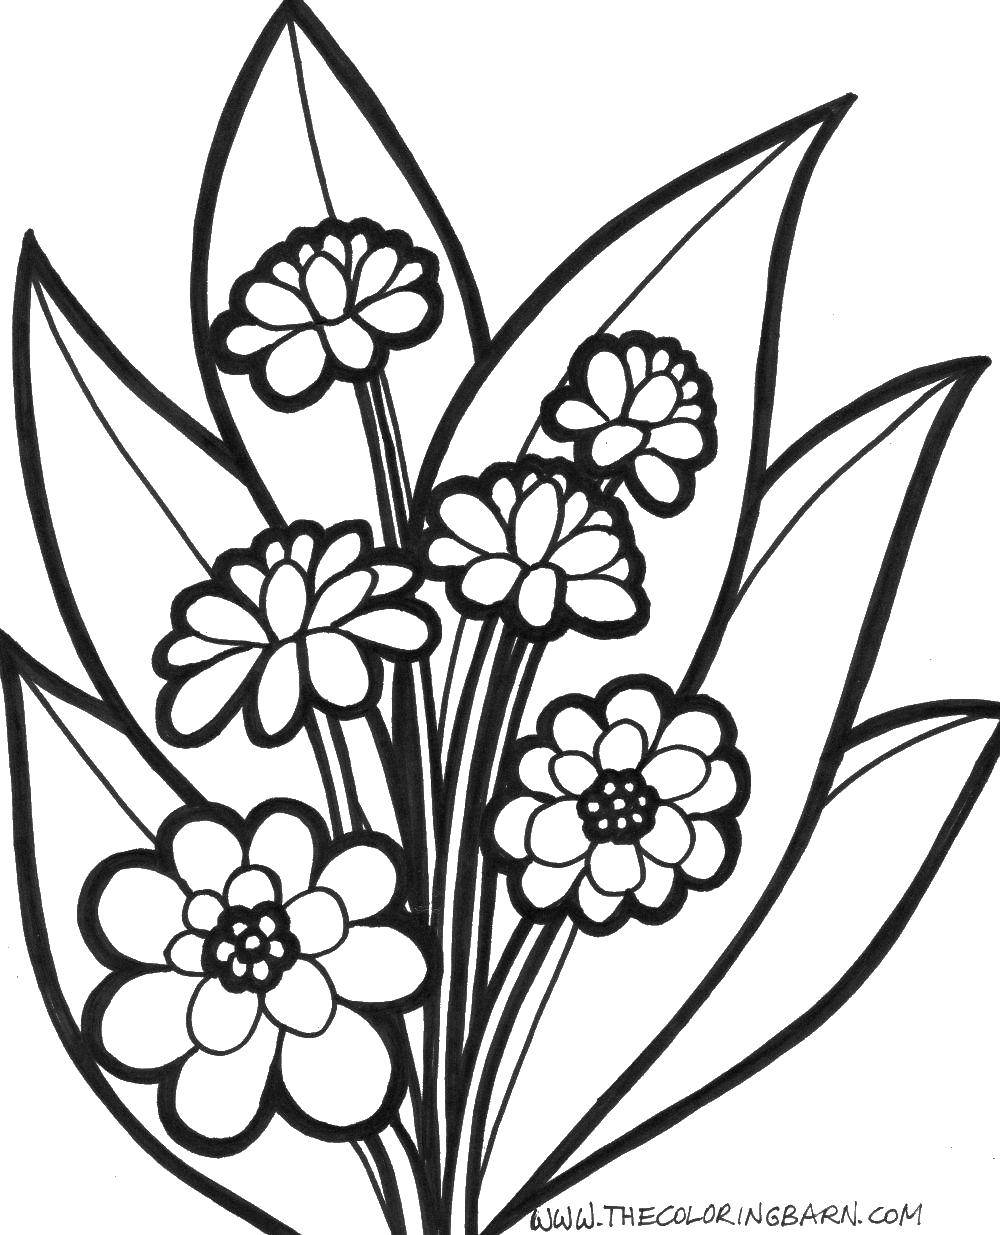 Coloring Flowers and grass. Category Flowers. Tags:  Flowers.